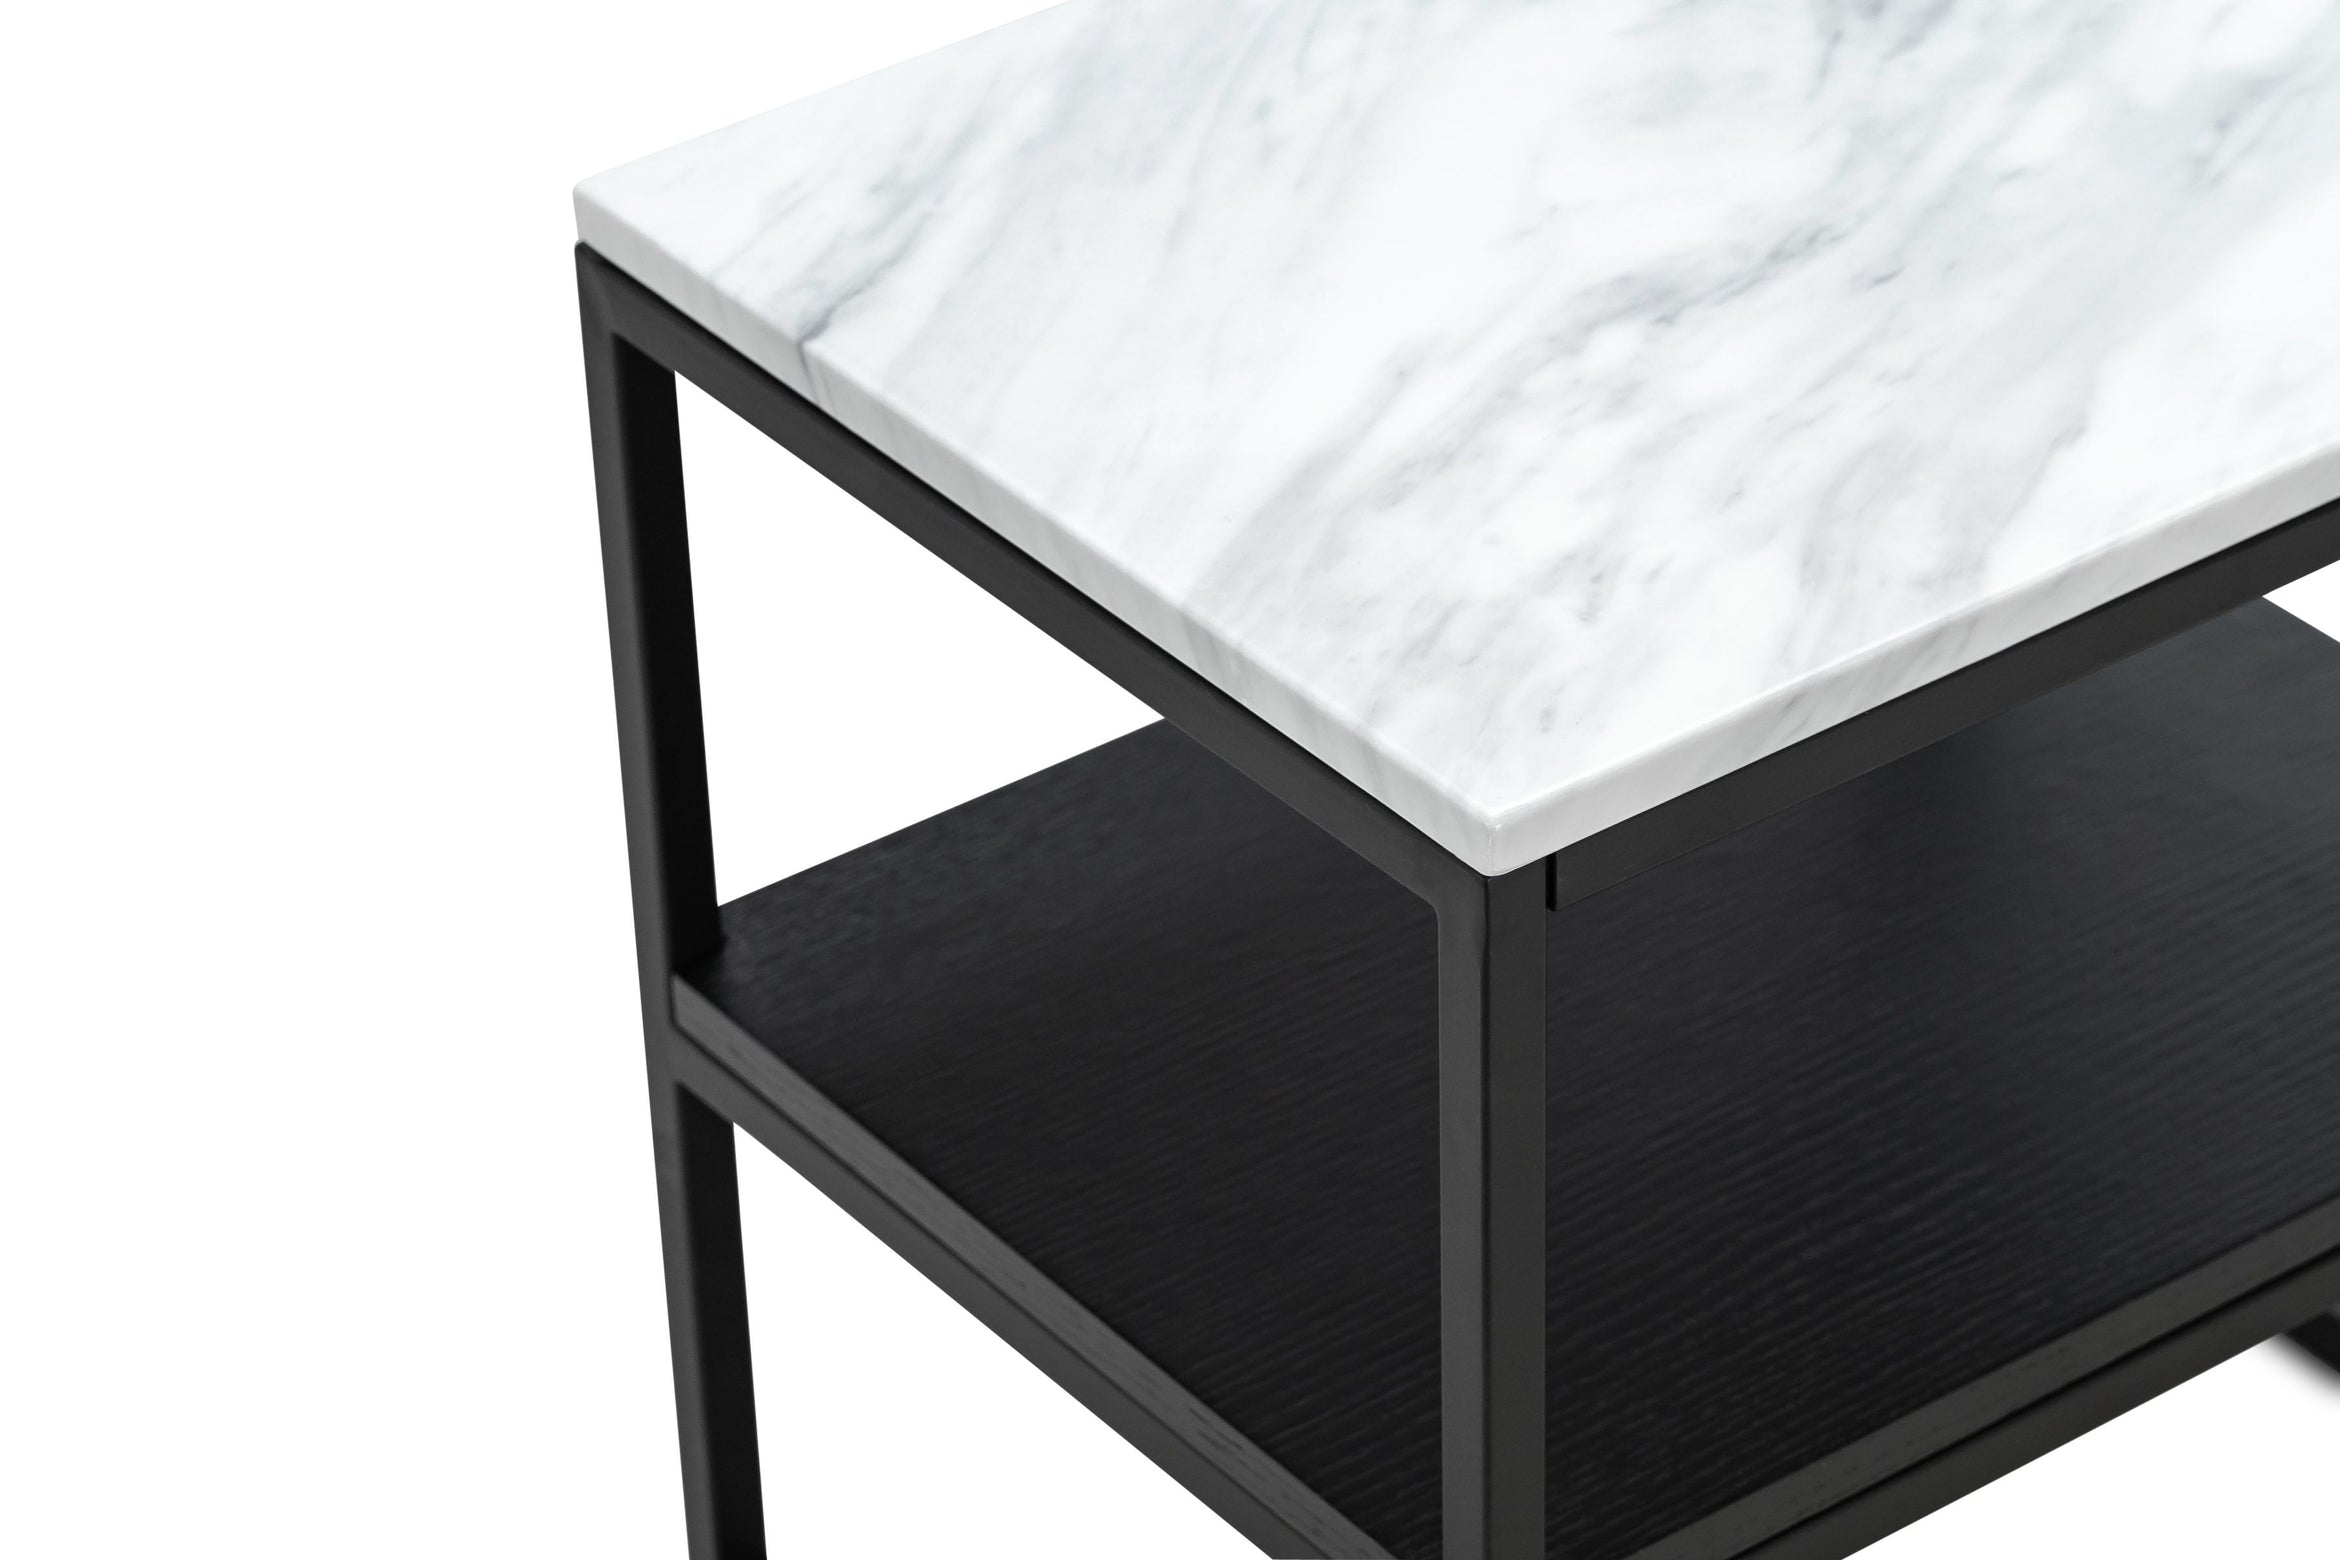 Jackey White Marble Side Table - Black - Bedside Tables